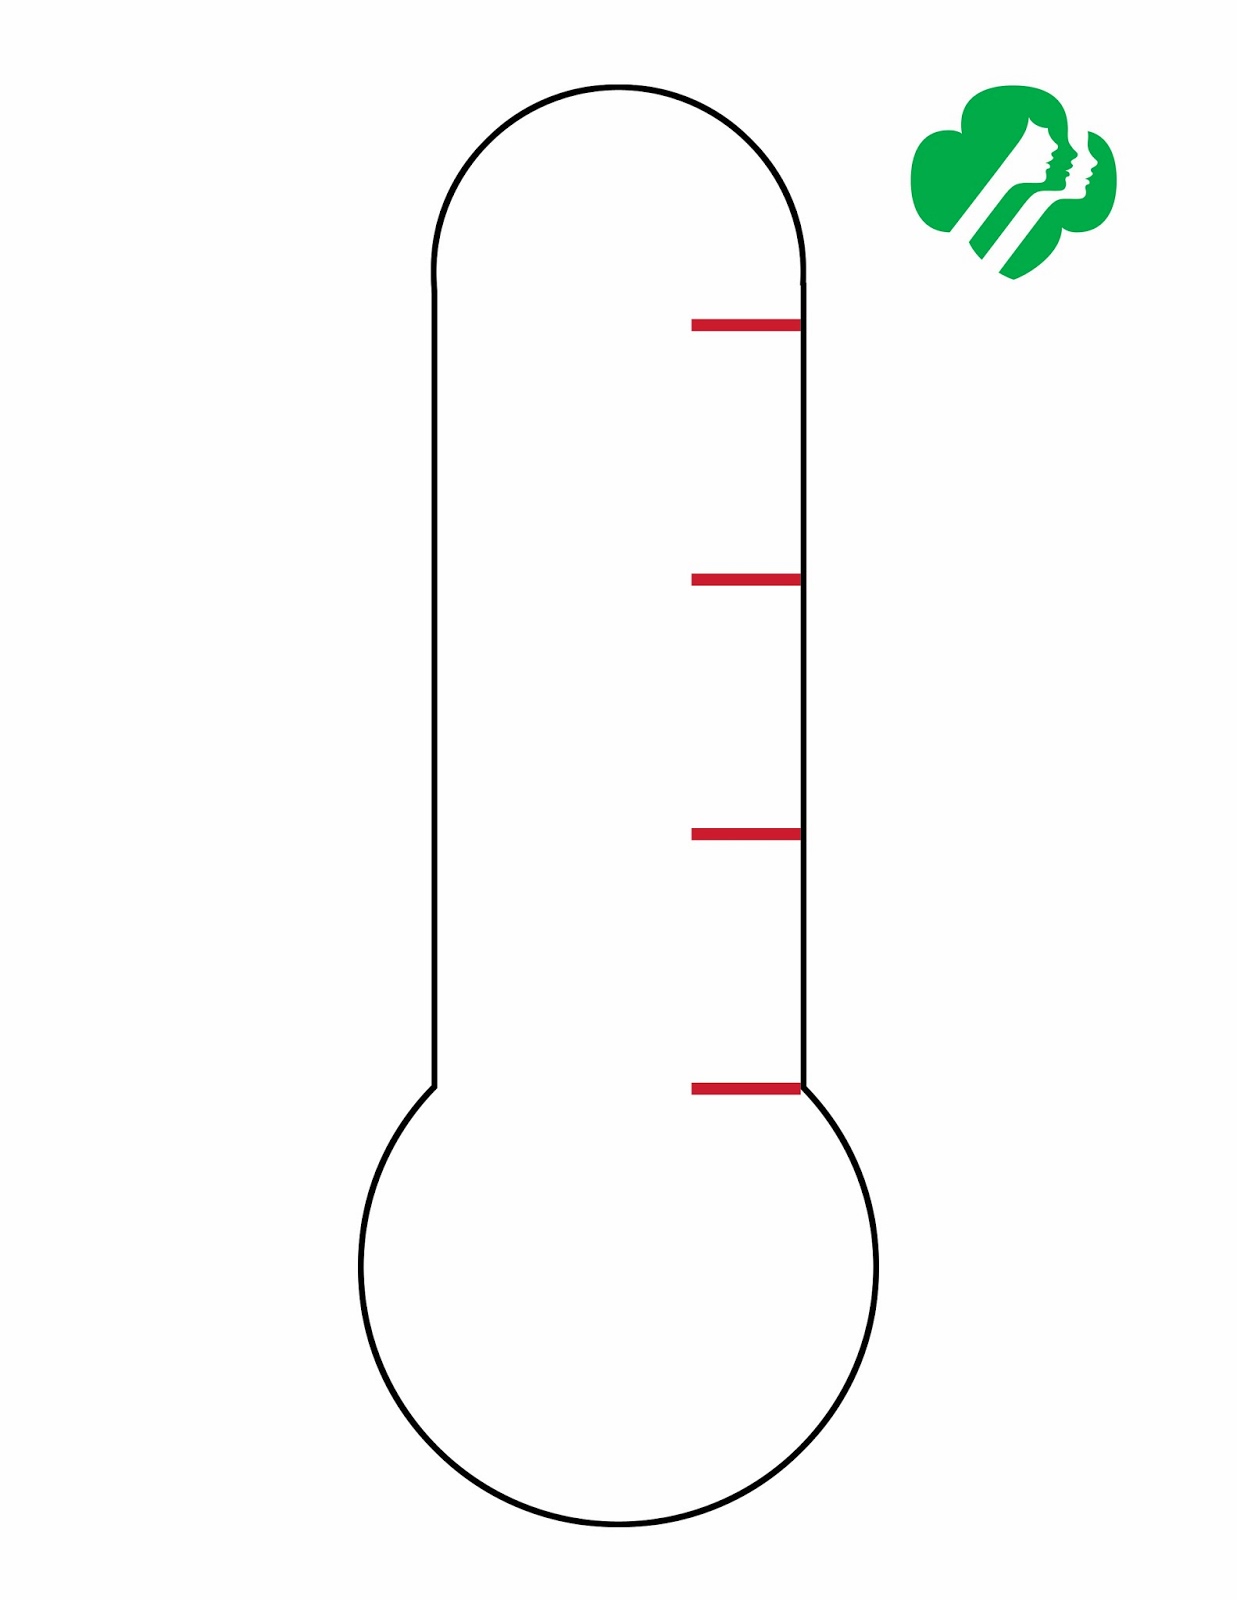 Blank Thermometer Clip Art Blank goal thermometer